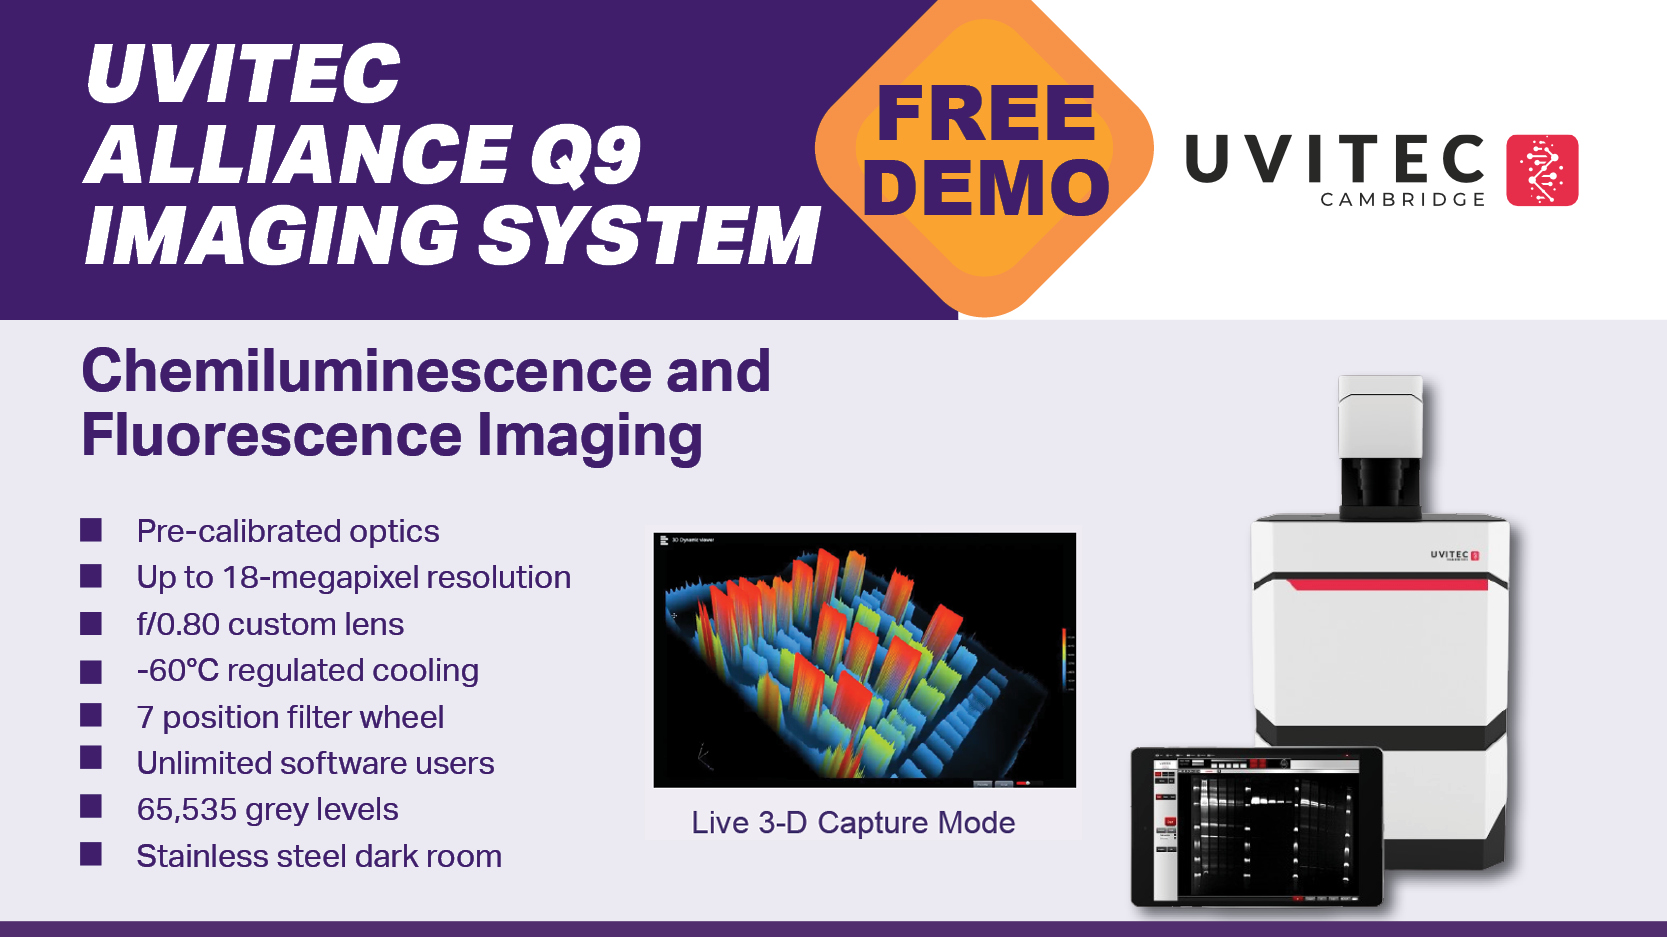 FREE DEMO ON OUR UVITEC  ALLIANCE Q9  IMAGING SYSTEM